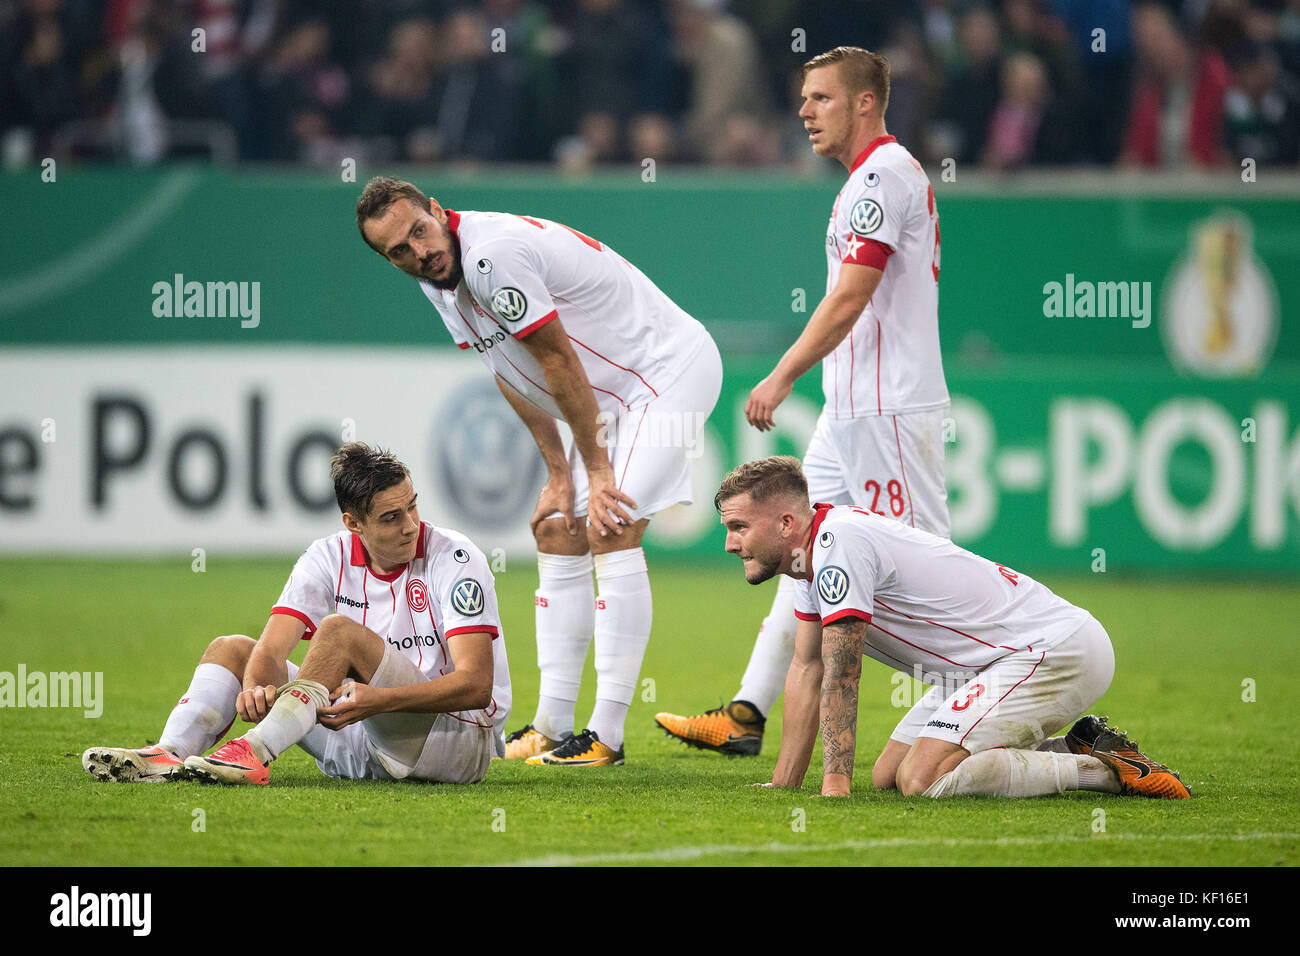 Dusseldorf's Florian Neuhaus (left to right), Emir Kujovic, Rouwen Hennings and Andre Hoffmann disappointed after their 0:1 defeat at the DFB Cup soccer match between Fortuna Dosseldorf and Borussia Monchengladbach in Dusseldorf, Germany, 24 October 2017. (EMBARGO CONDITIONS - ATTENTION: The DFB prohibits the utilisation and publication of sequential pictures on the internet and other online media during the match (including half-time). ATTENTION: BLOCKING PERIOD! The DFB permits the further utilisation and publication of the pictures for mobile services (especially MMS) and for DVB-H and D Stock Photo